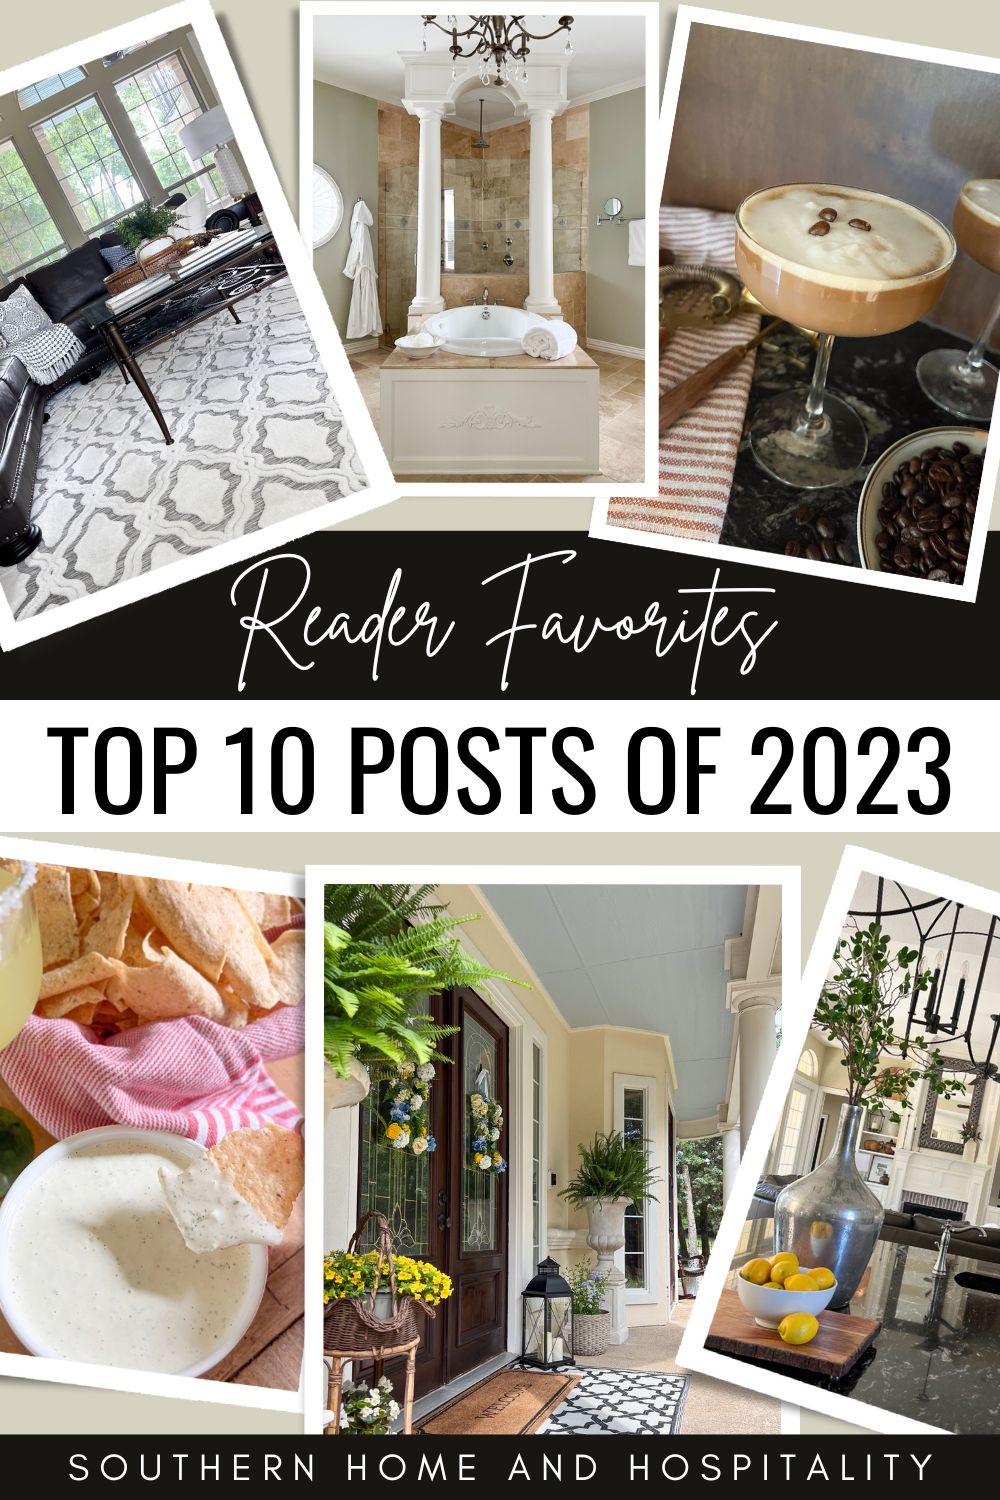 Top 10 Most Popular Blog Posts of 2023 on Southern Home & Hospitality